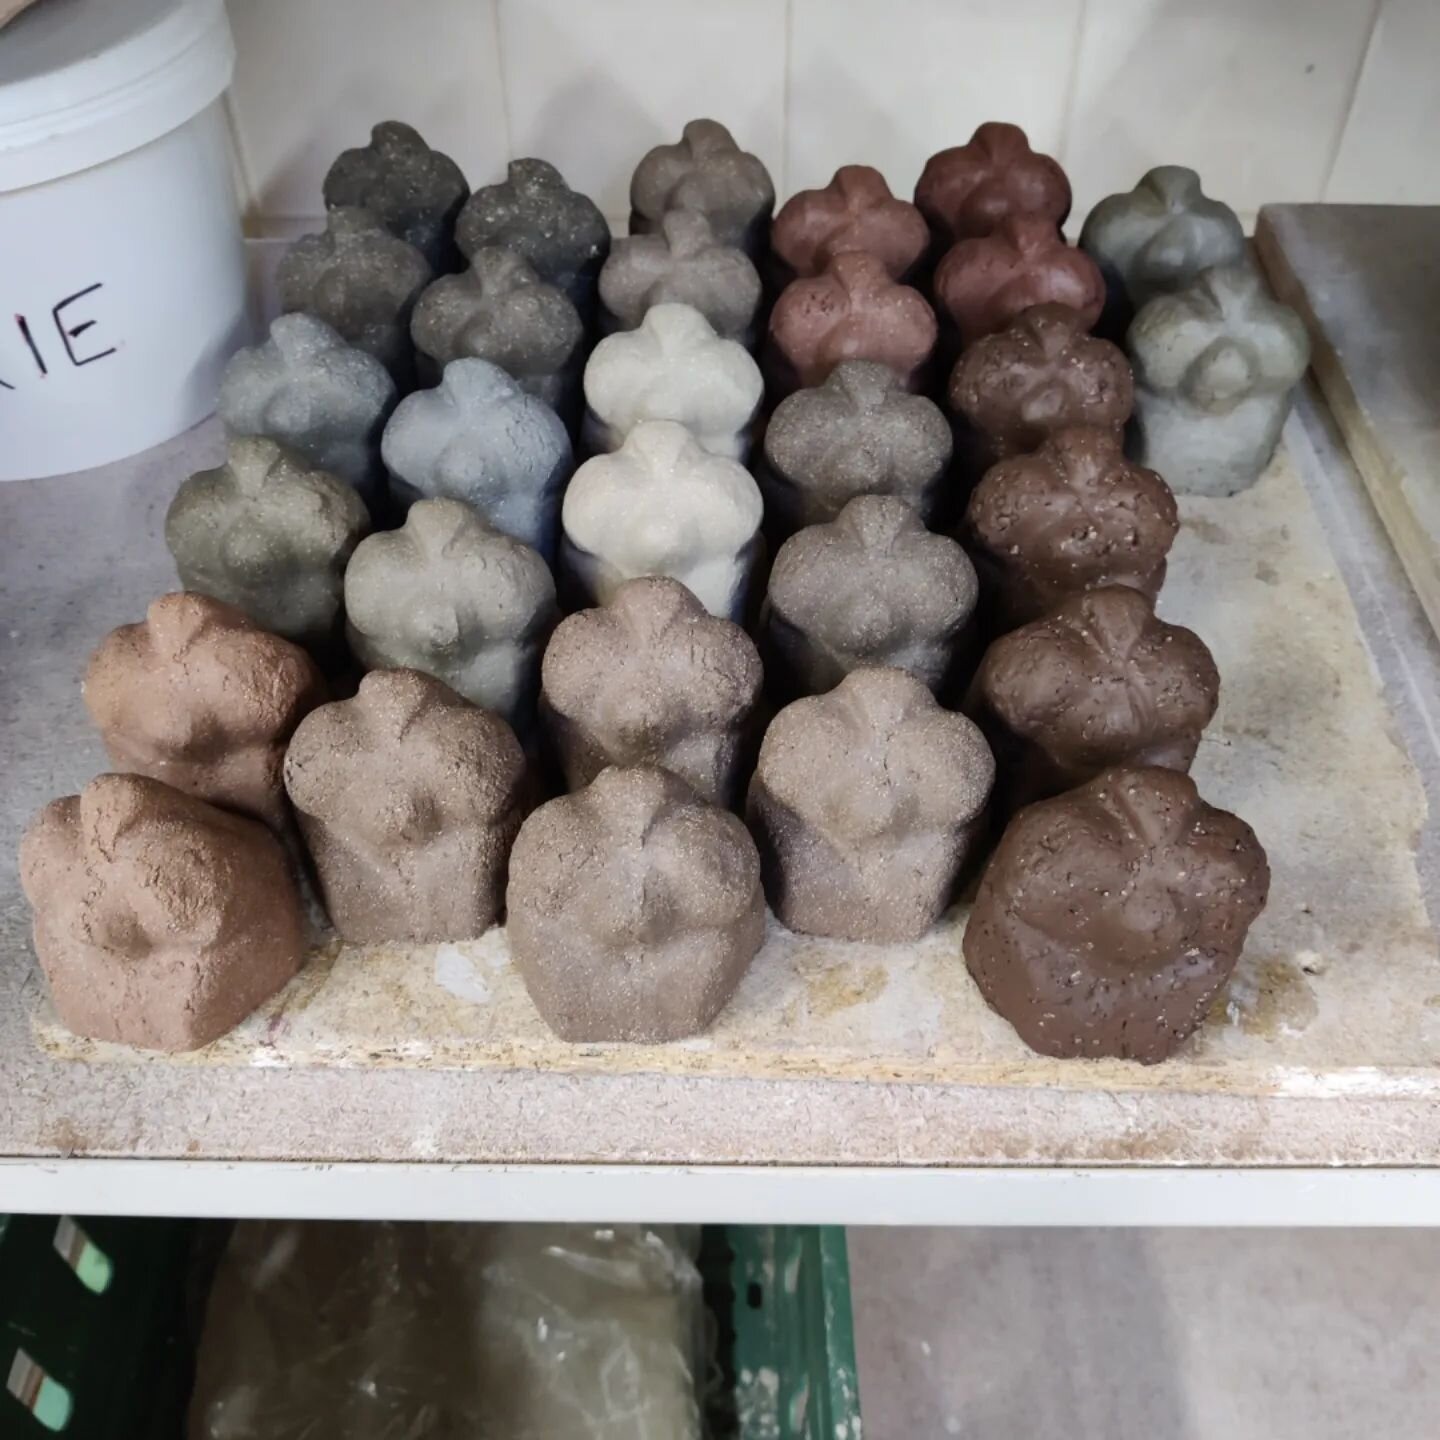 It's been a very busy week in the studio at uni and at home, over 60 snoots made, some ready to bisque, many more drying and even quite a few sculpture tests in various stages too. I'm really starting to get a feel for the clays I like and which work